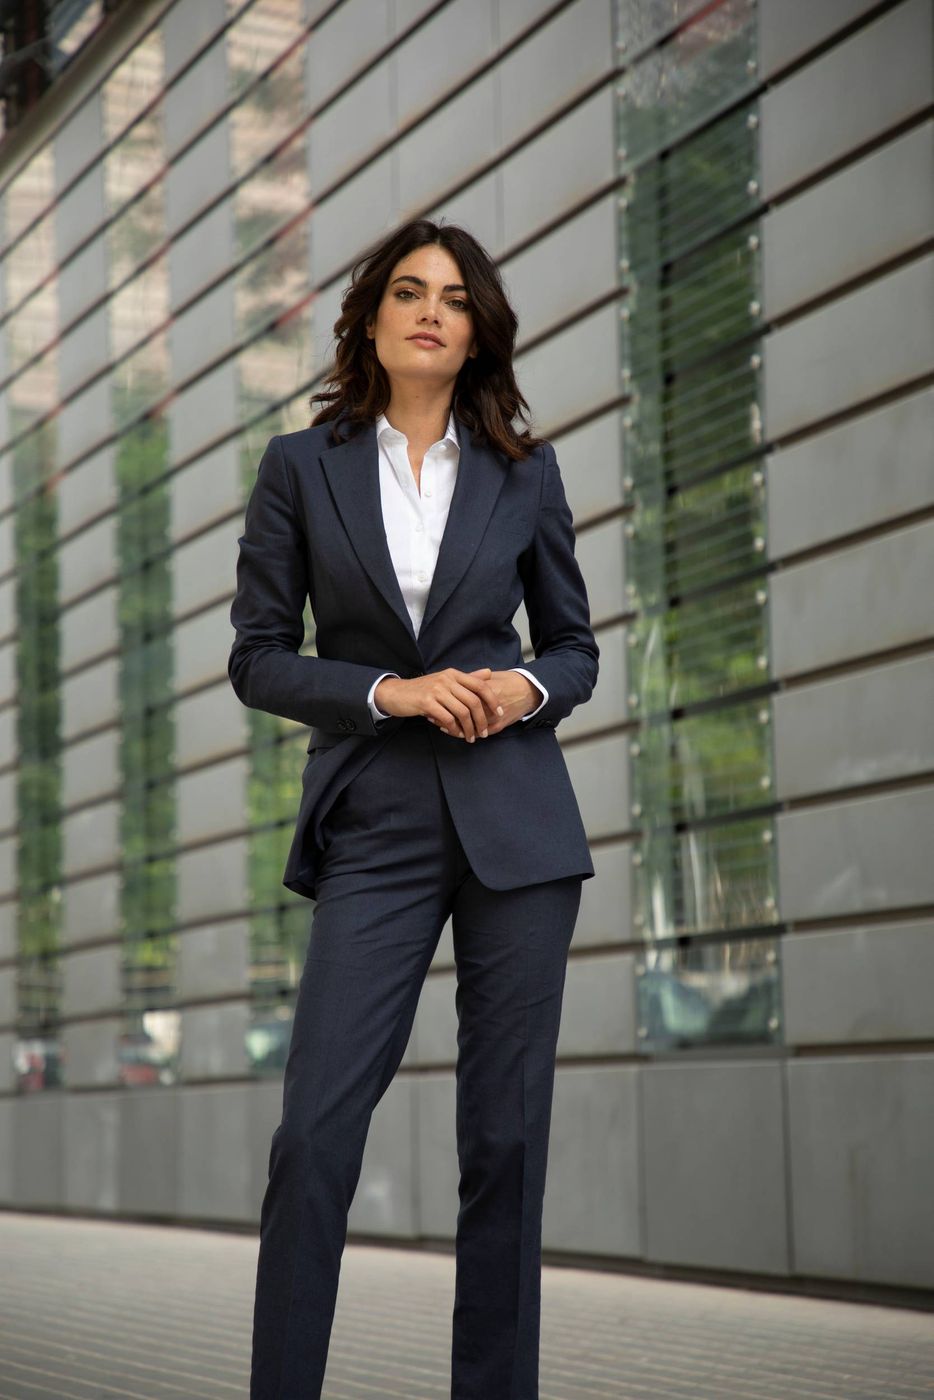 Classic business suit for women